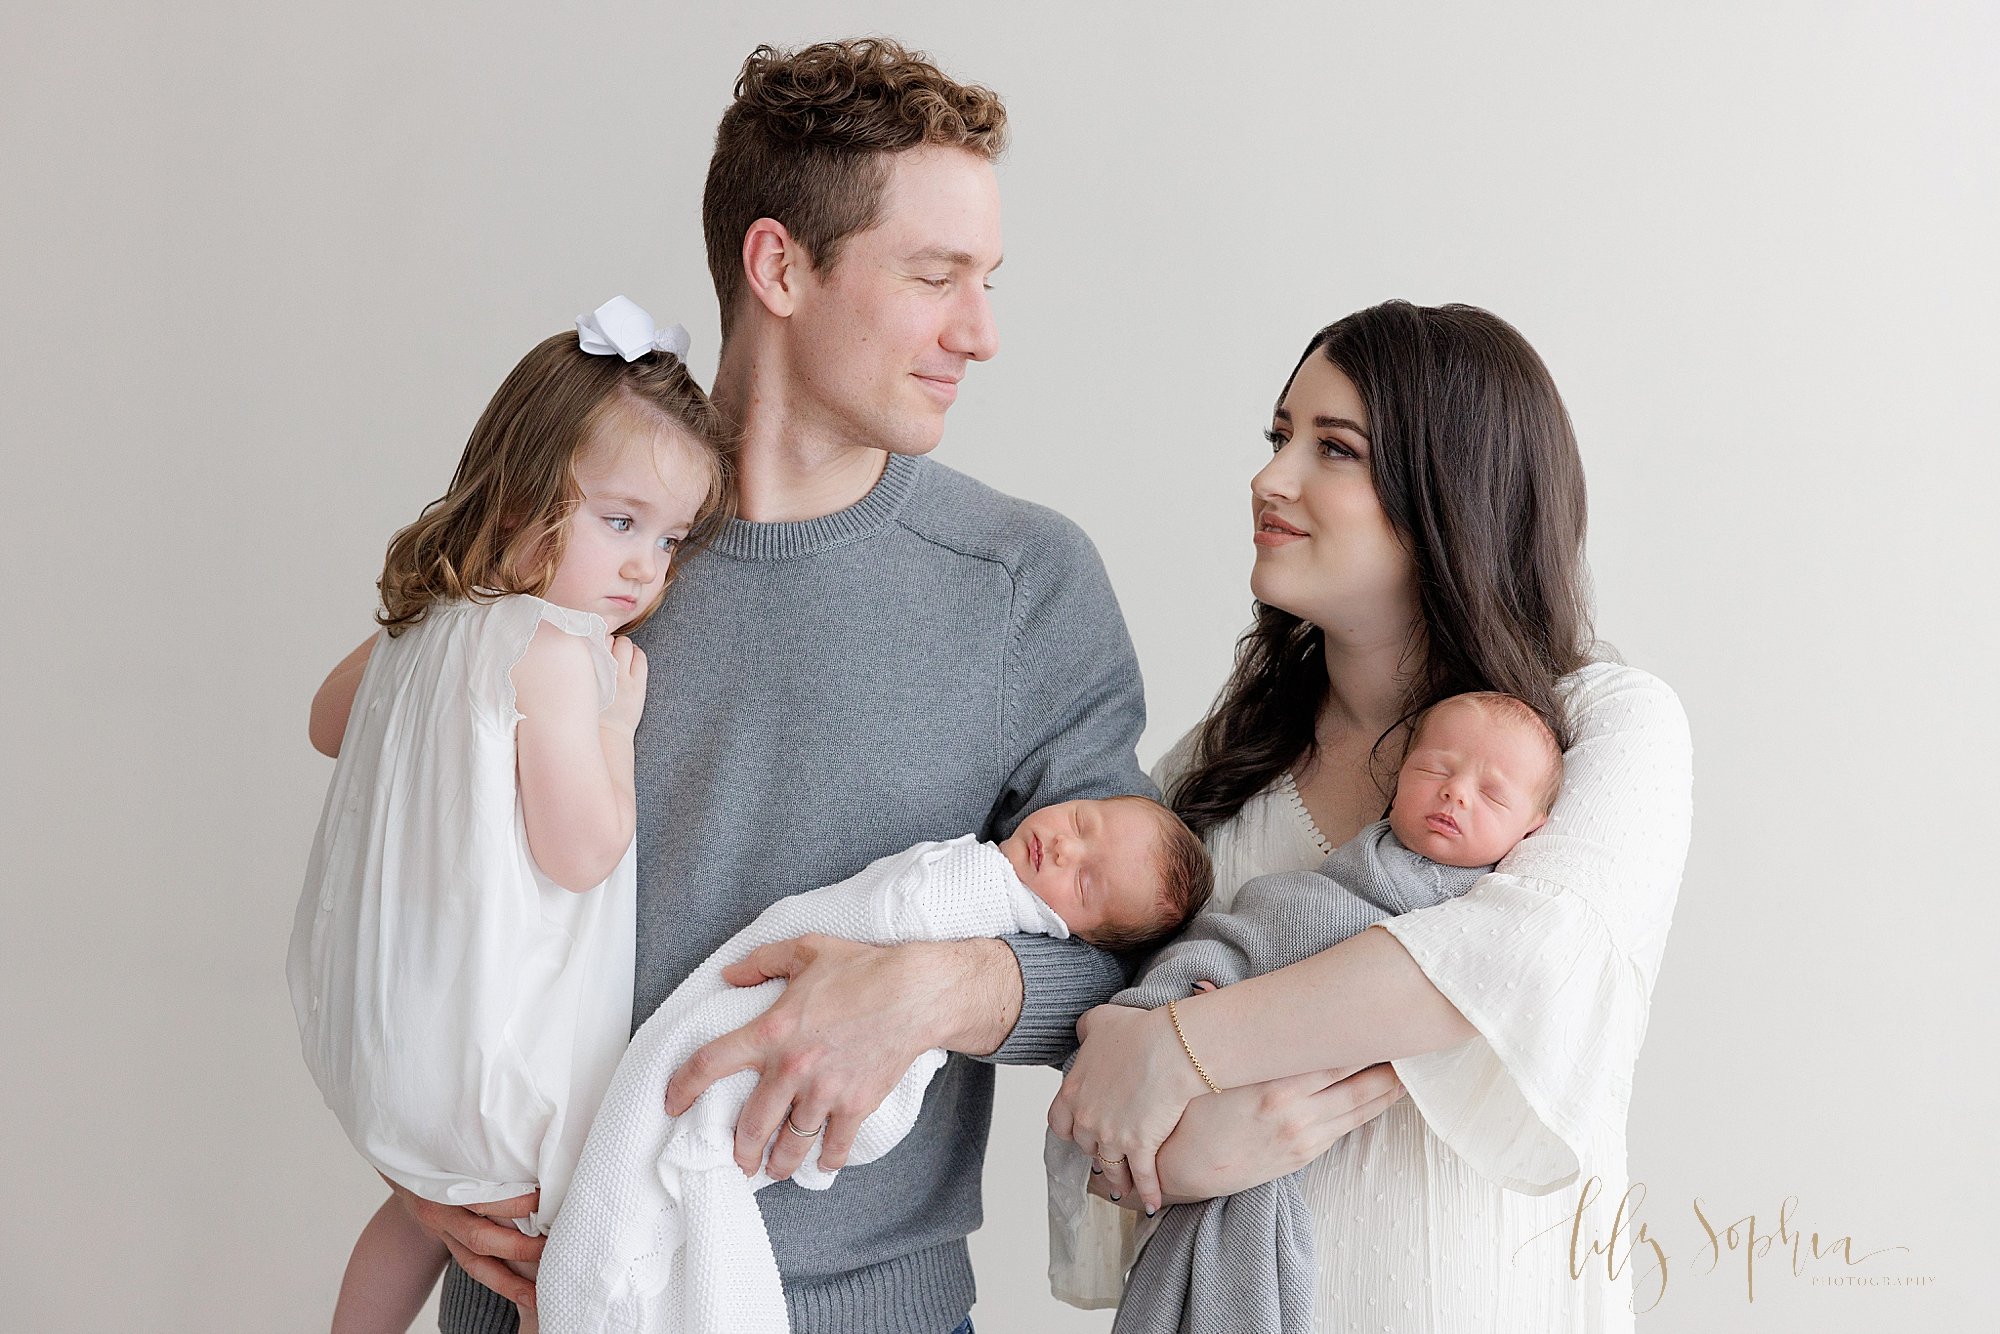  Family newborn portrait of a father holding his young daughter in his right arm and one of his newborn identical twin sons in his right arm as mom stands to his right and holds their other son in her left arm while the couple look lovingly at one an